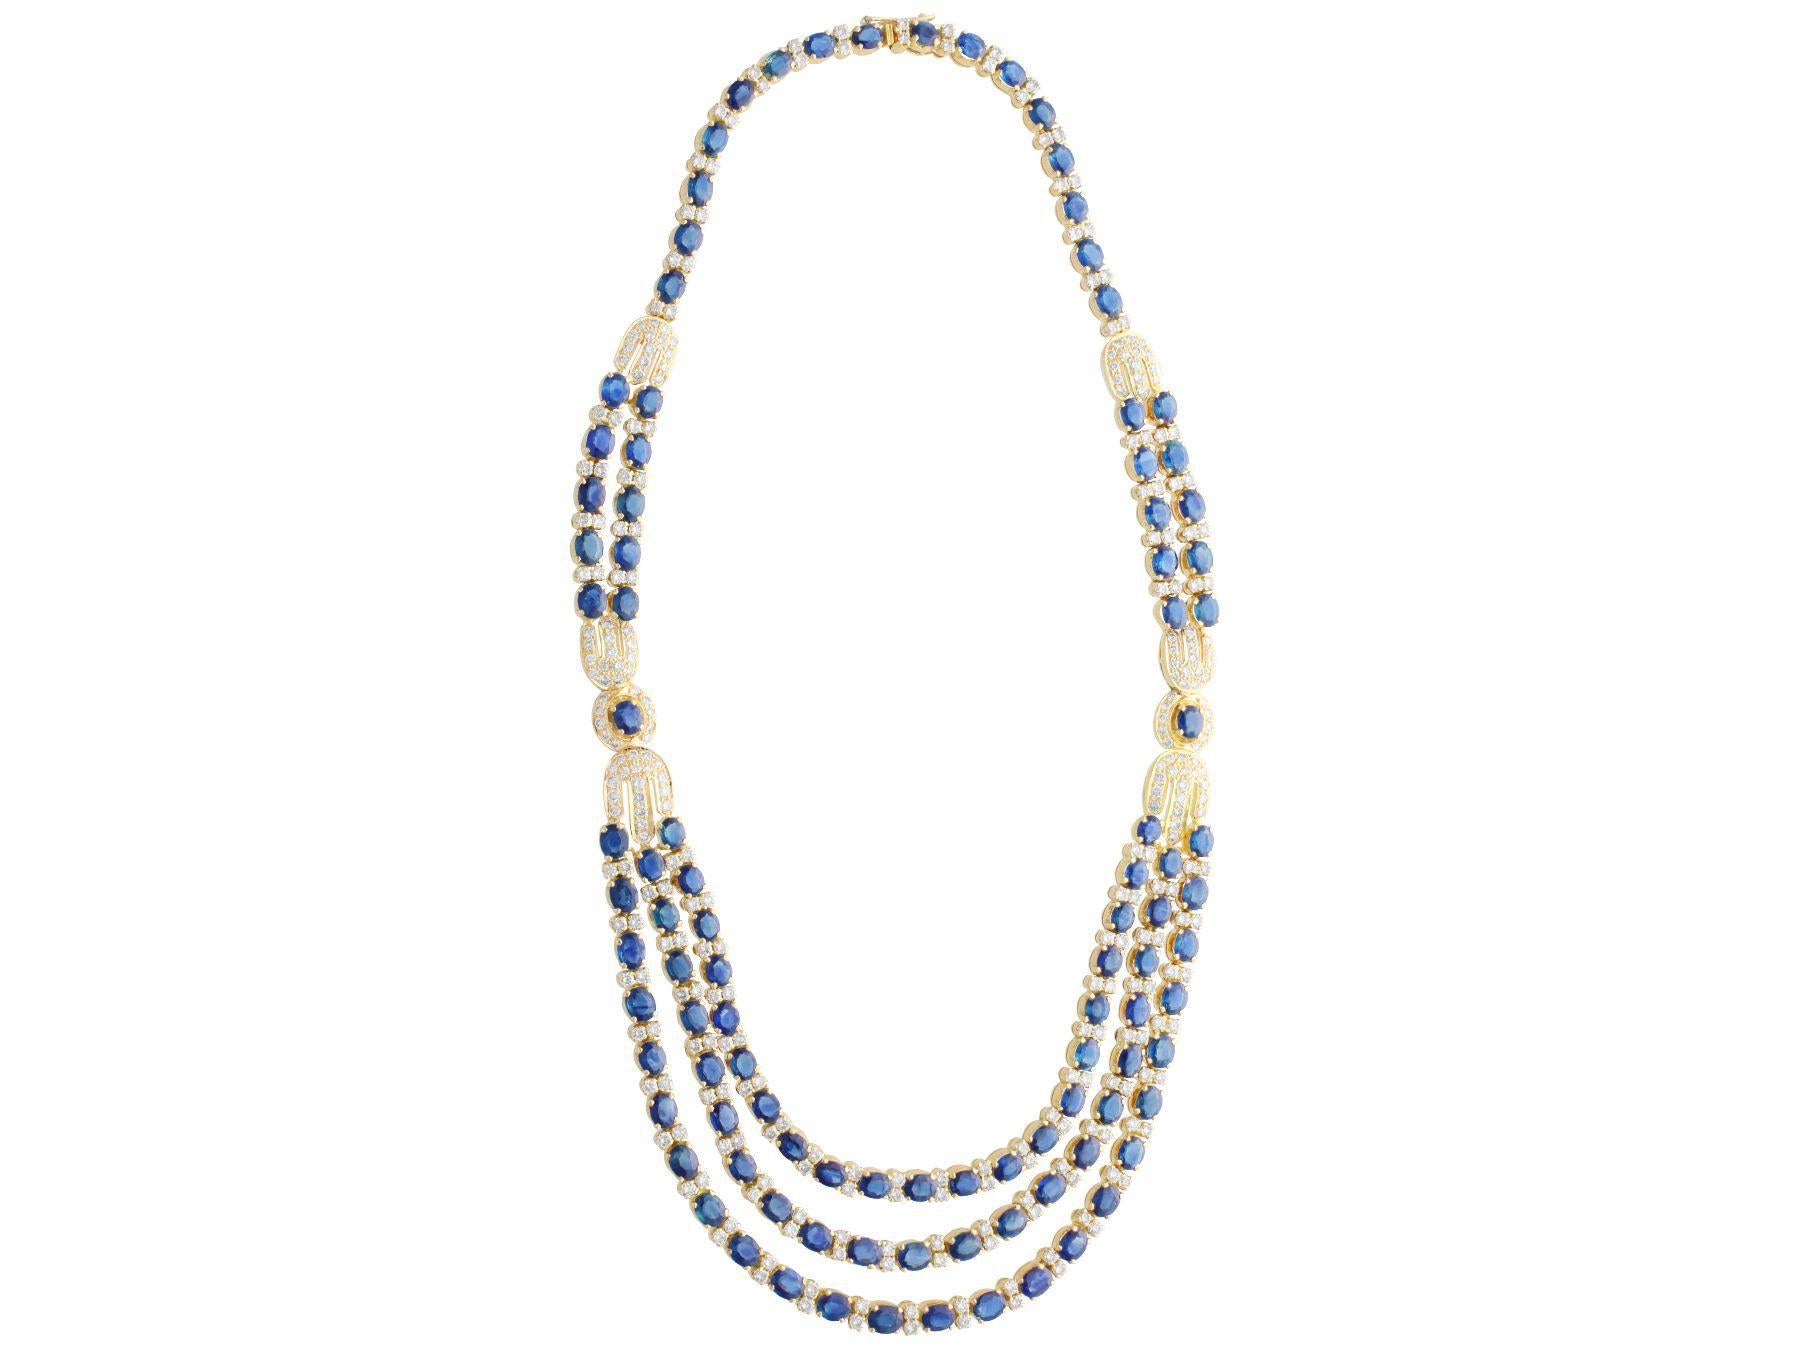 Oval Cut Vintage Sapphire and Diamond Yellow Gold Earring and Necklace Set Circa 1970